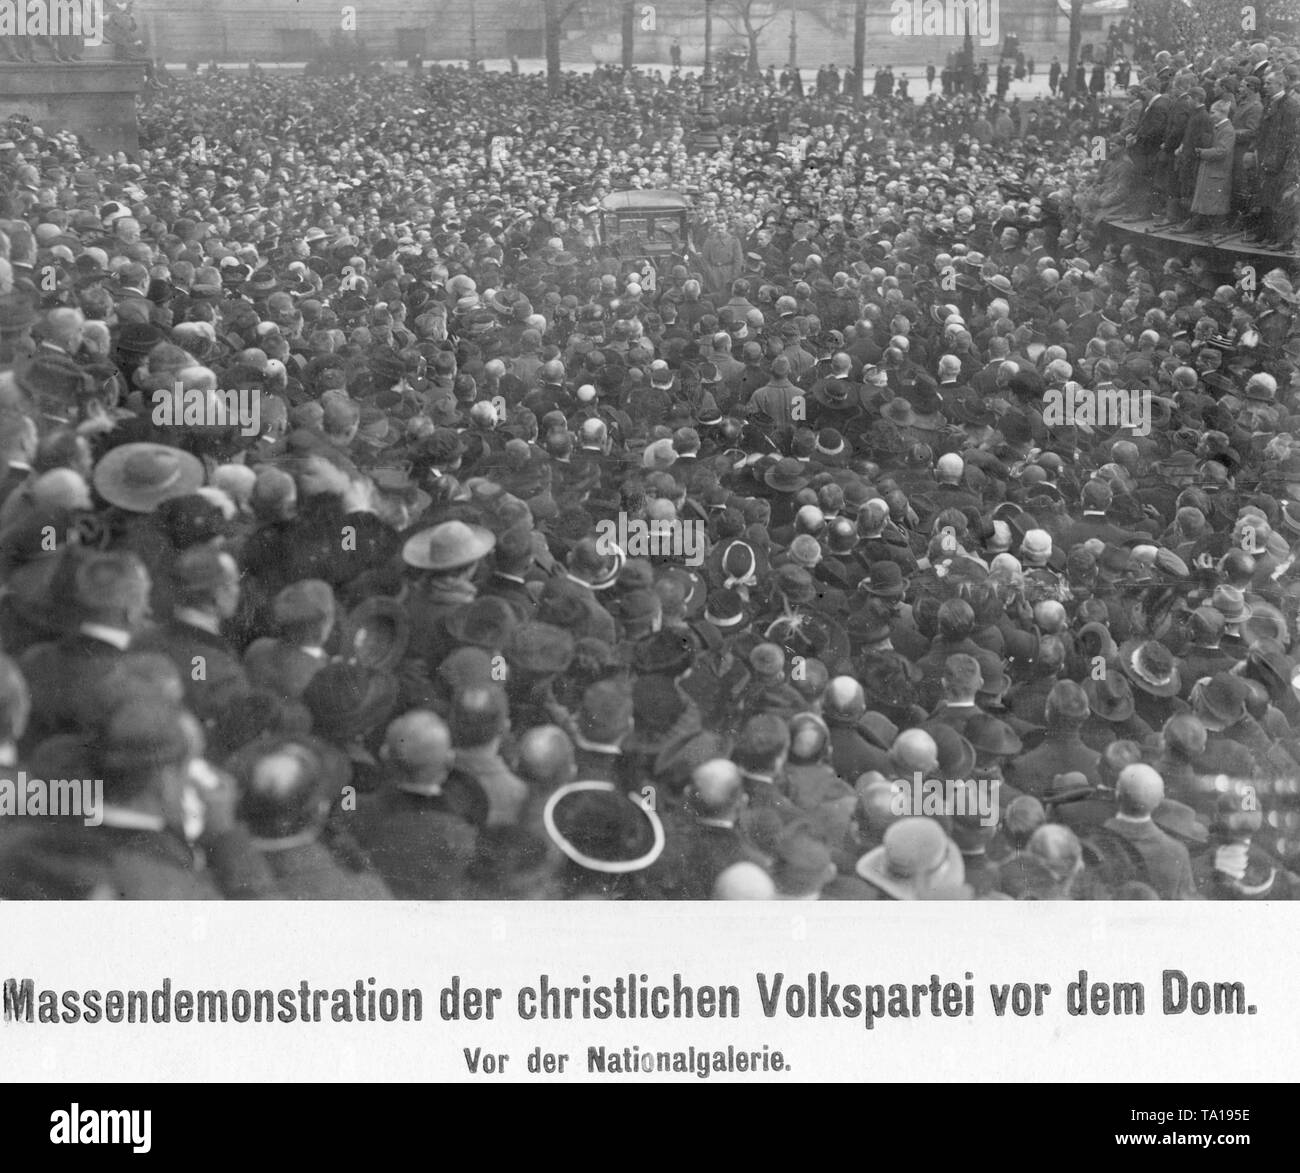 Supporters of the Centre Party, which at that time still bore the alternative name of Christliche Volkspartei (Christian People's Party) gather before the Nationalgalerie in Berlin. Stock Photo